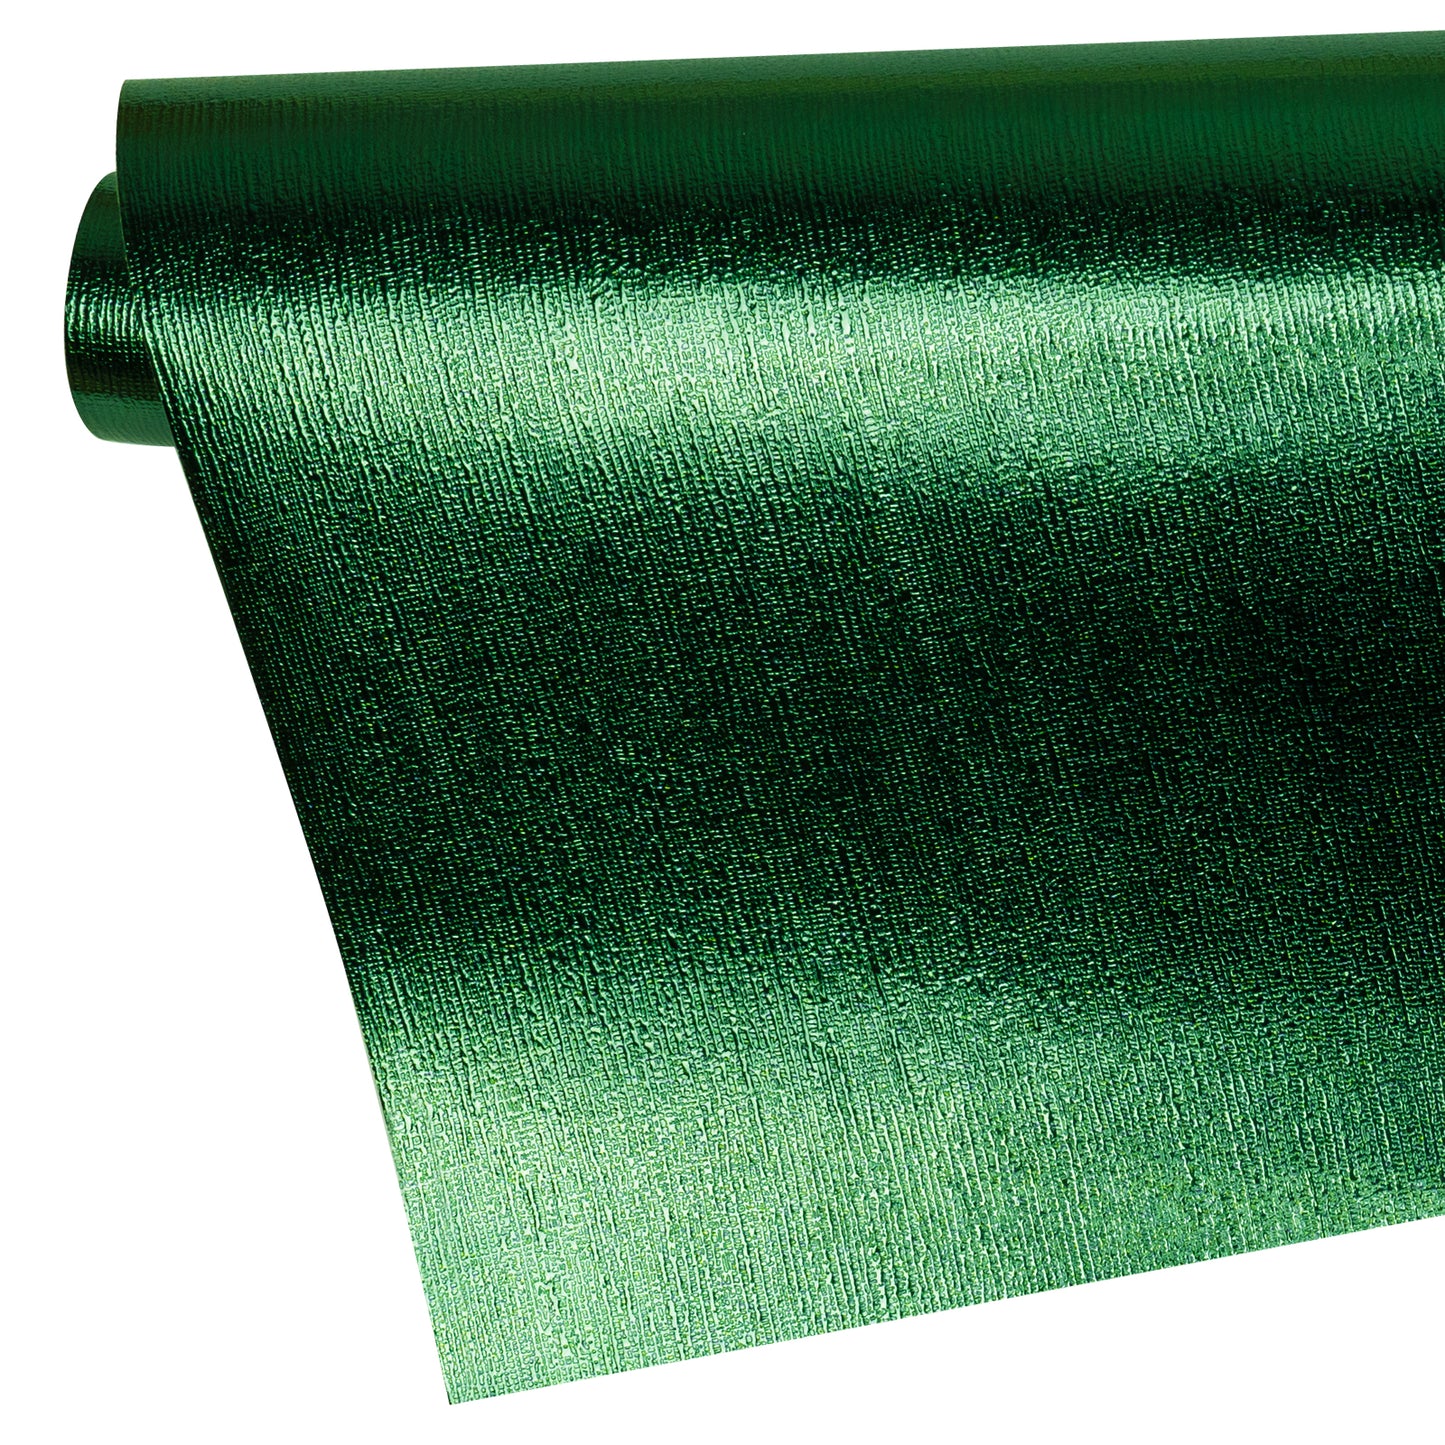 Embossed Cross Grain Wrapping Paper Roll Green Ream Wholesale Wrapaholic